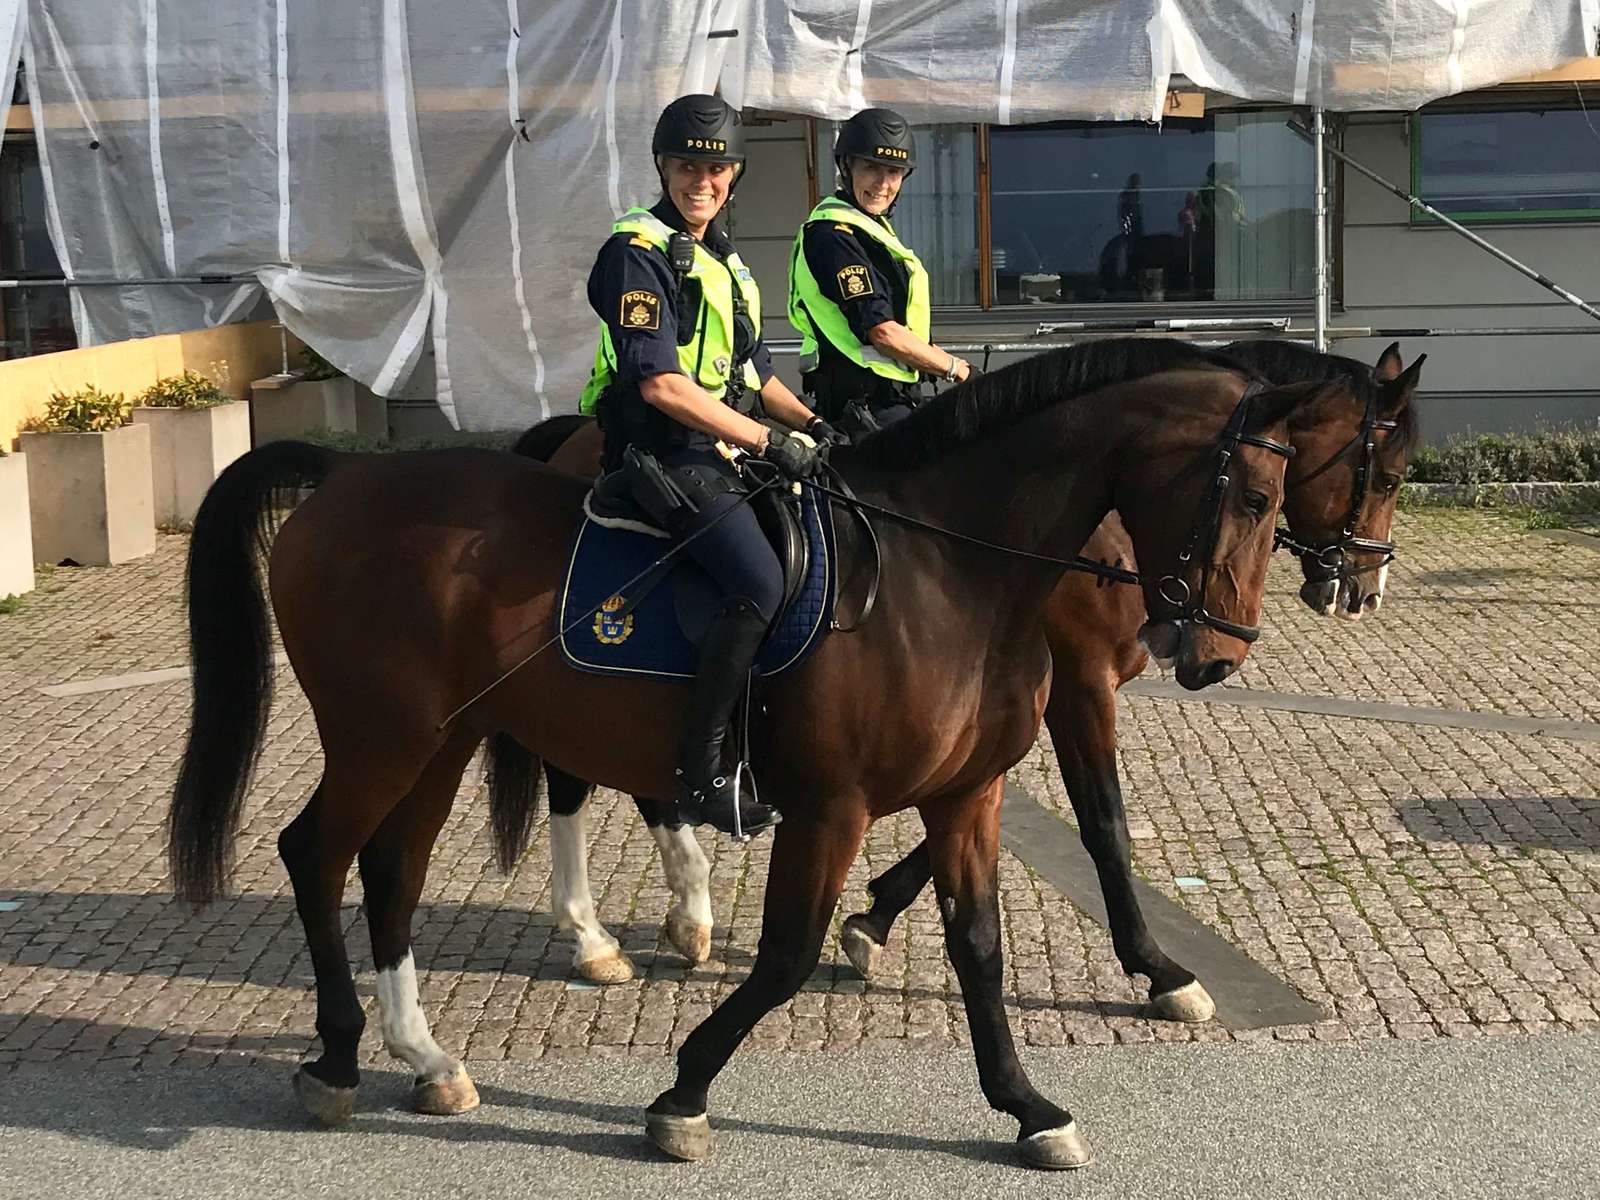 Police officers on horse